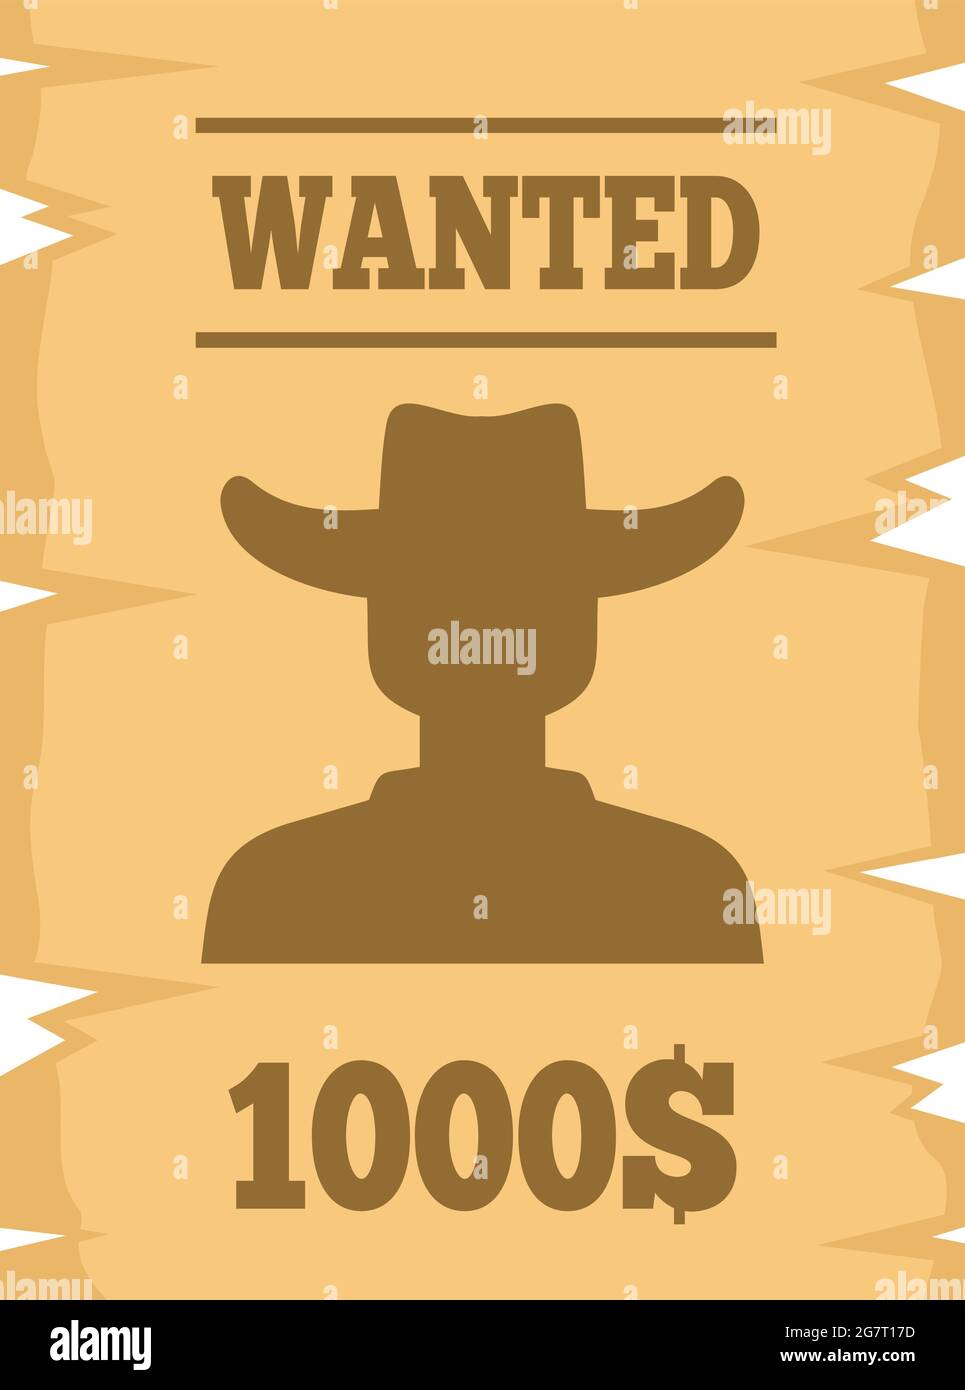 Western wanted paper icon. Flat illustration of western wanted paper vector icon isolated on white background Stock Vector